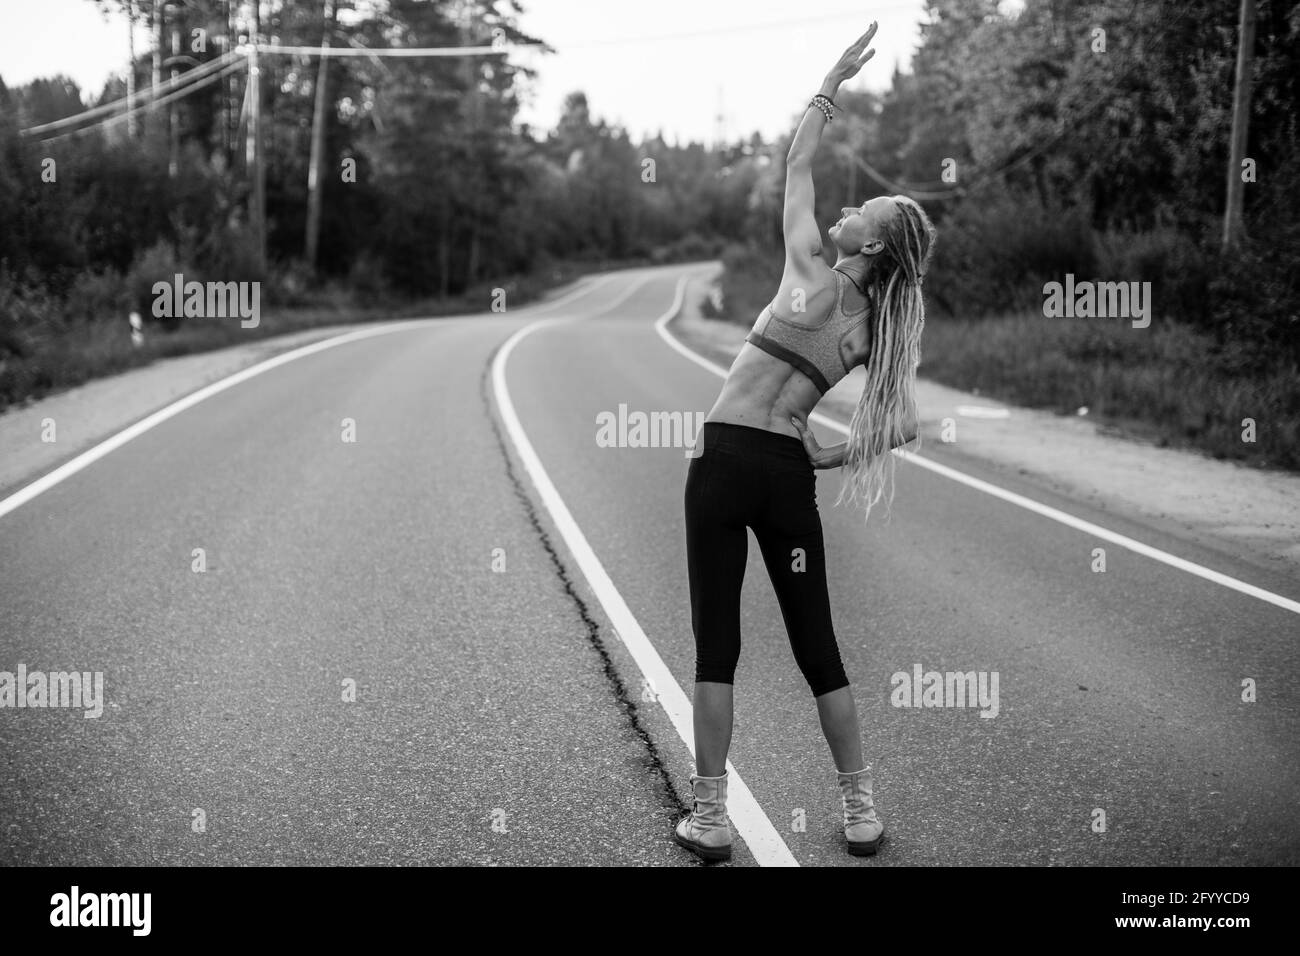 Woman warm-up before jogging on the road. Black and white photo. Stock Photo